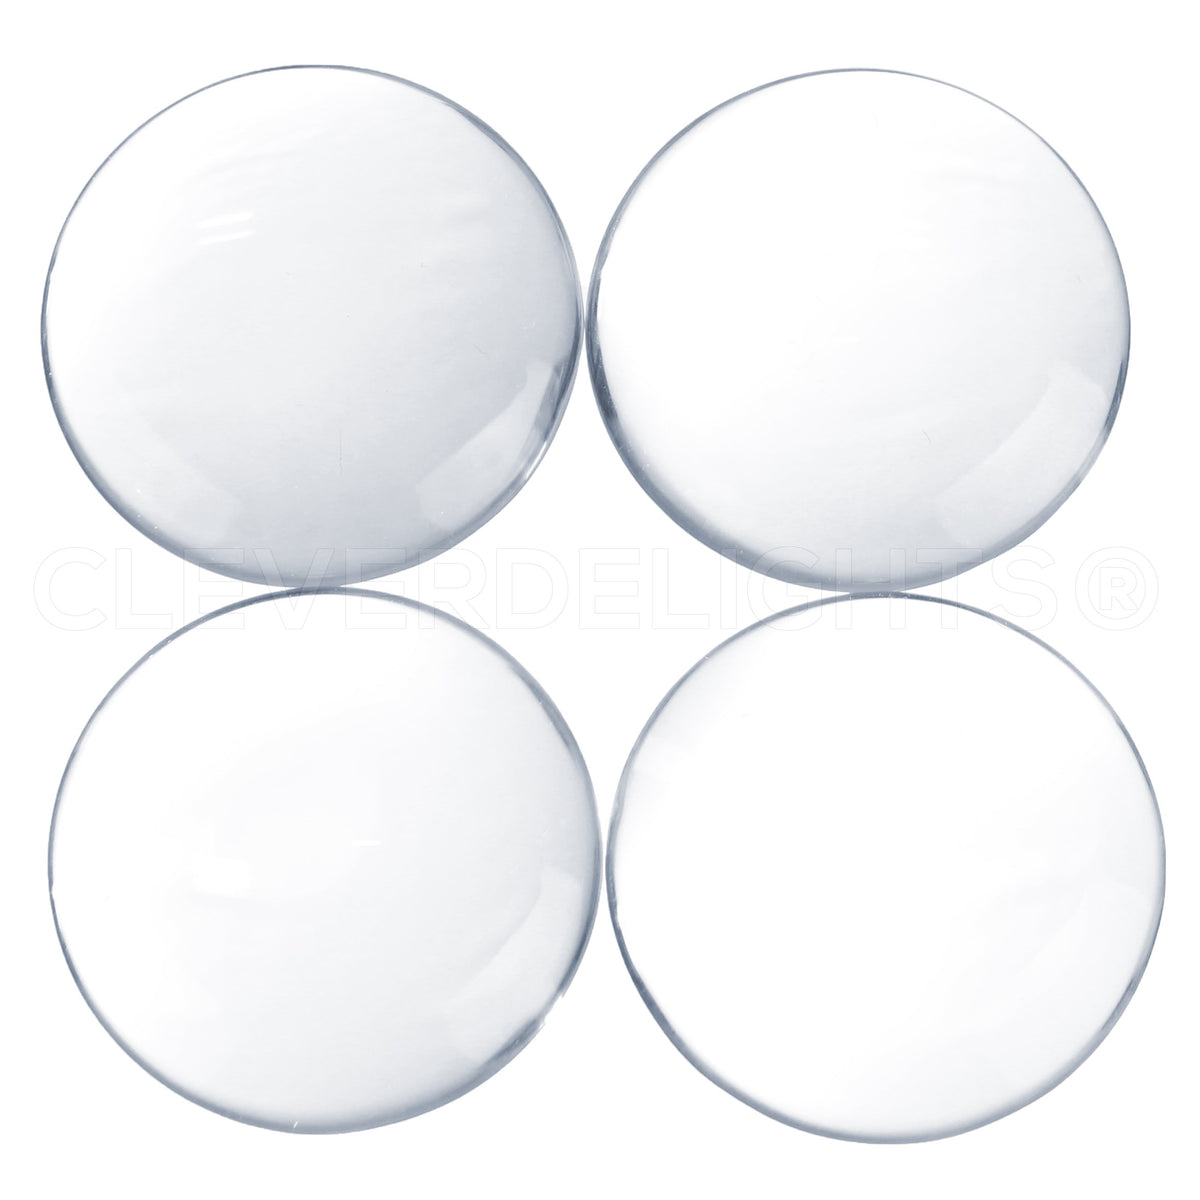 CleverDelights 18mm (11/16) Round Glass Cabochons